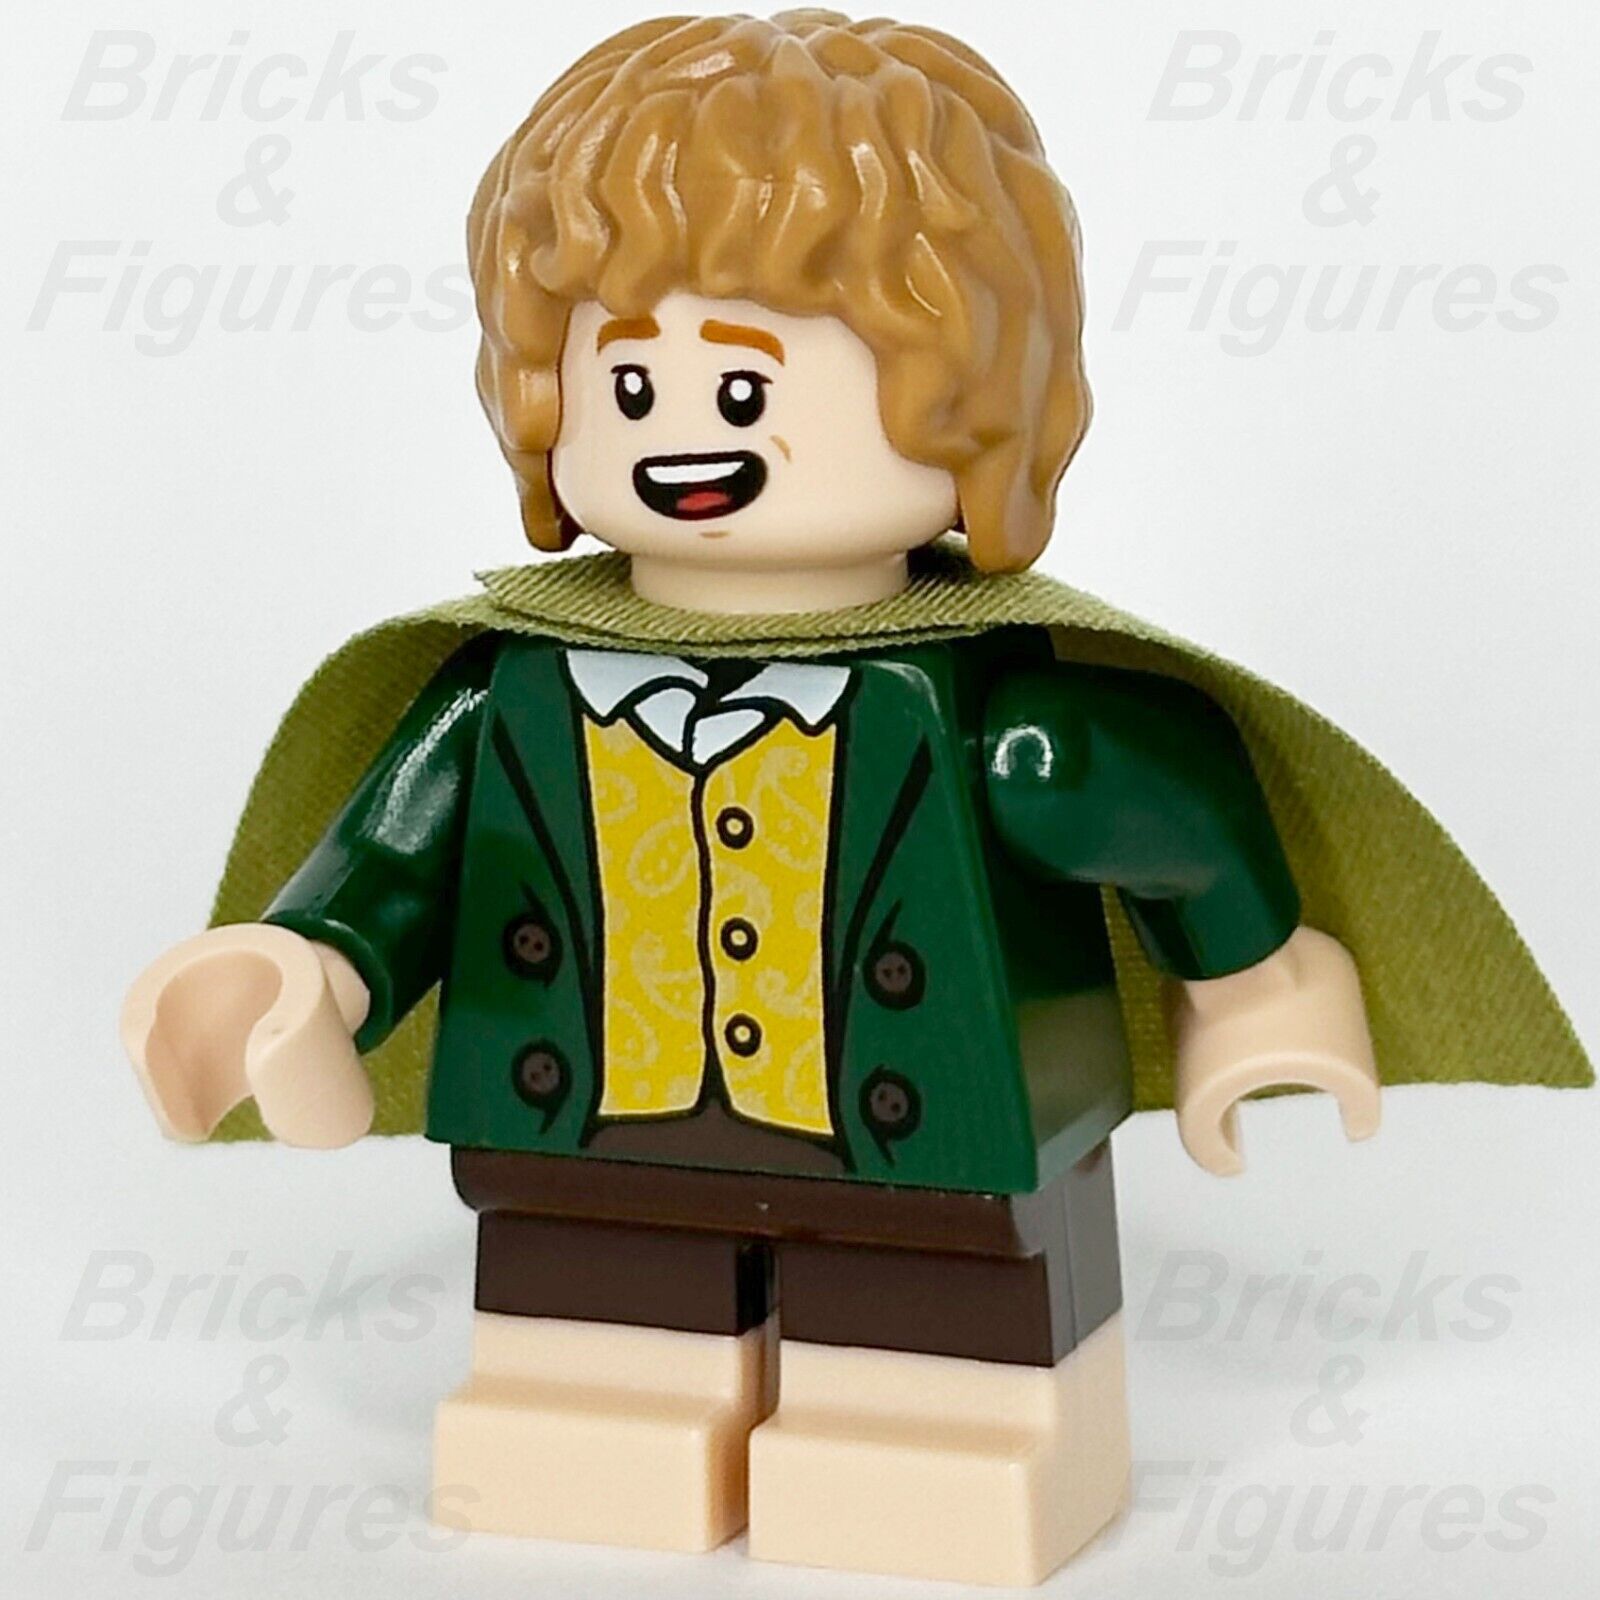 LEGO Merry Minifigure Hobbit The Lord of the Rings Meriadoc Brandybuck 10316